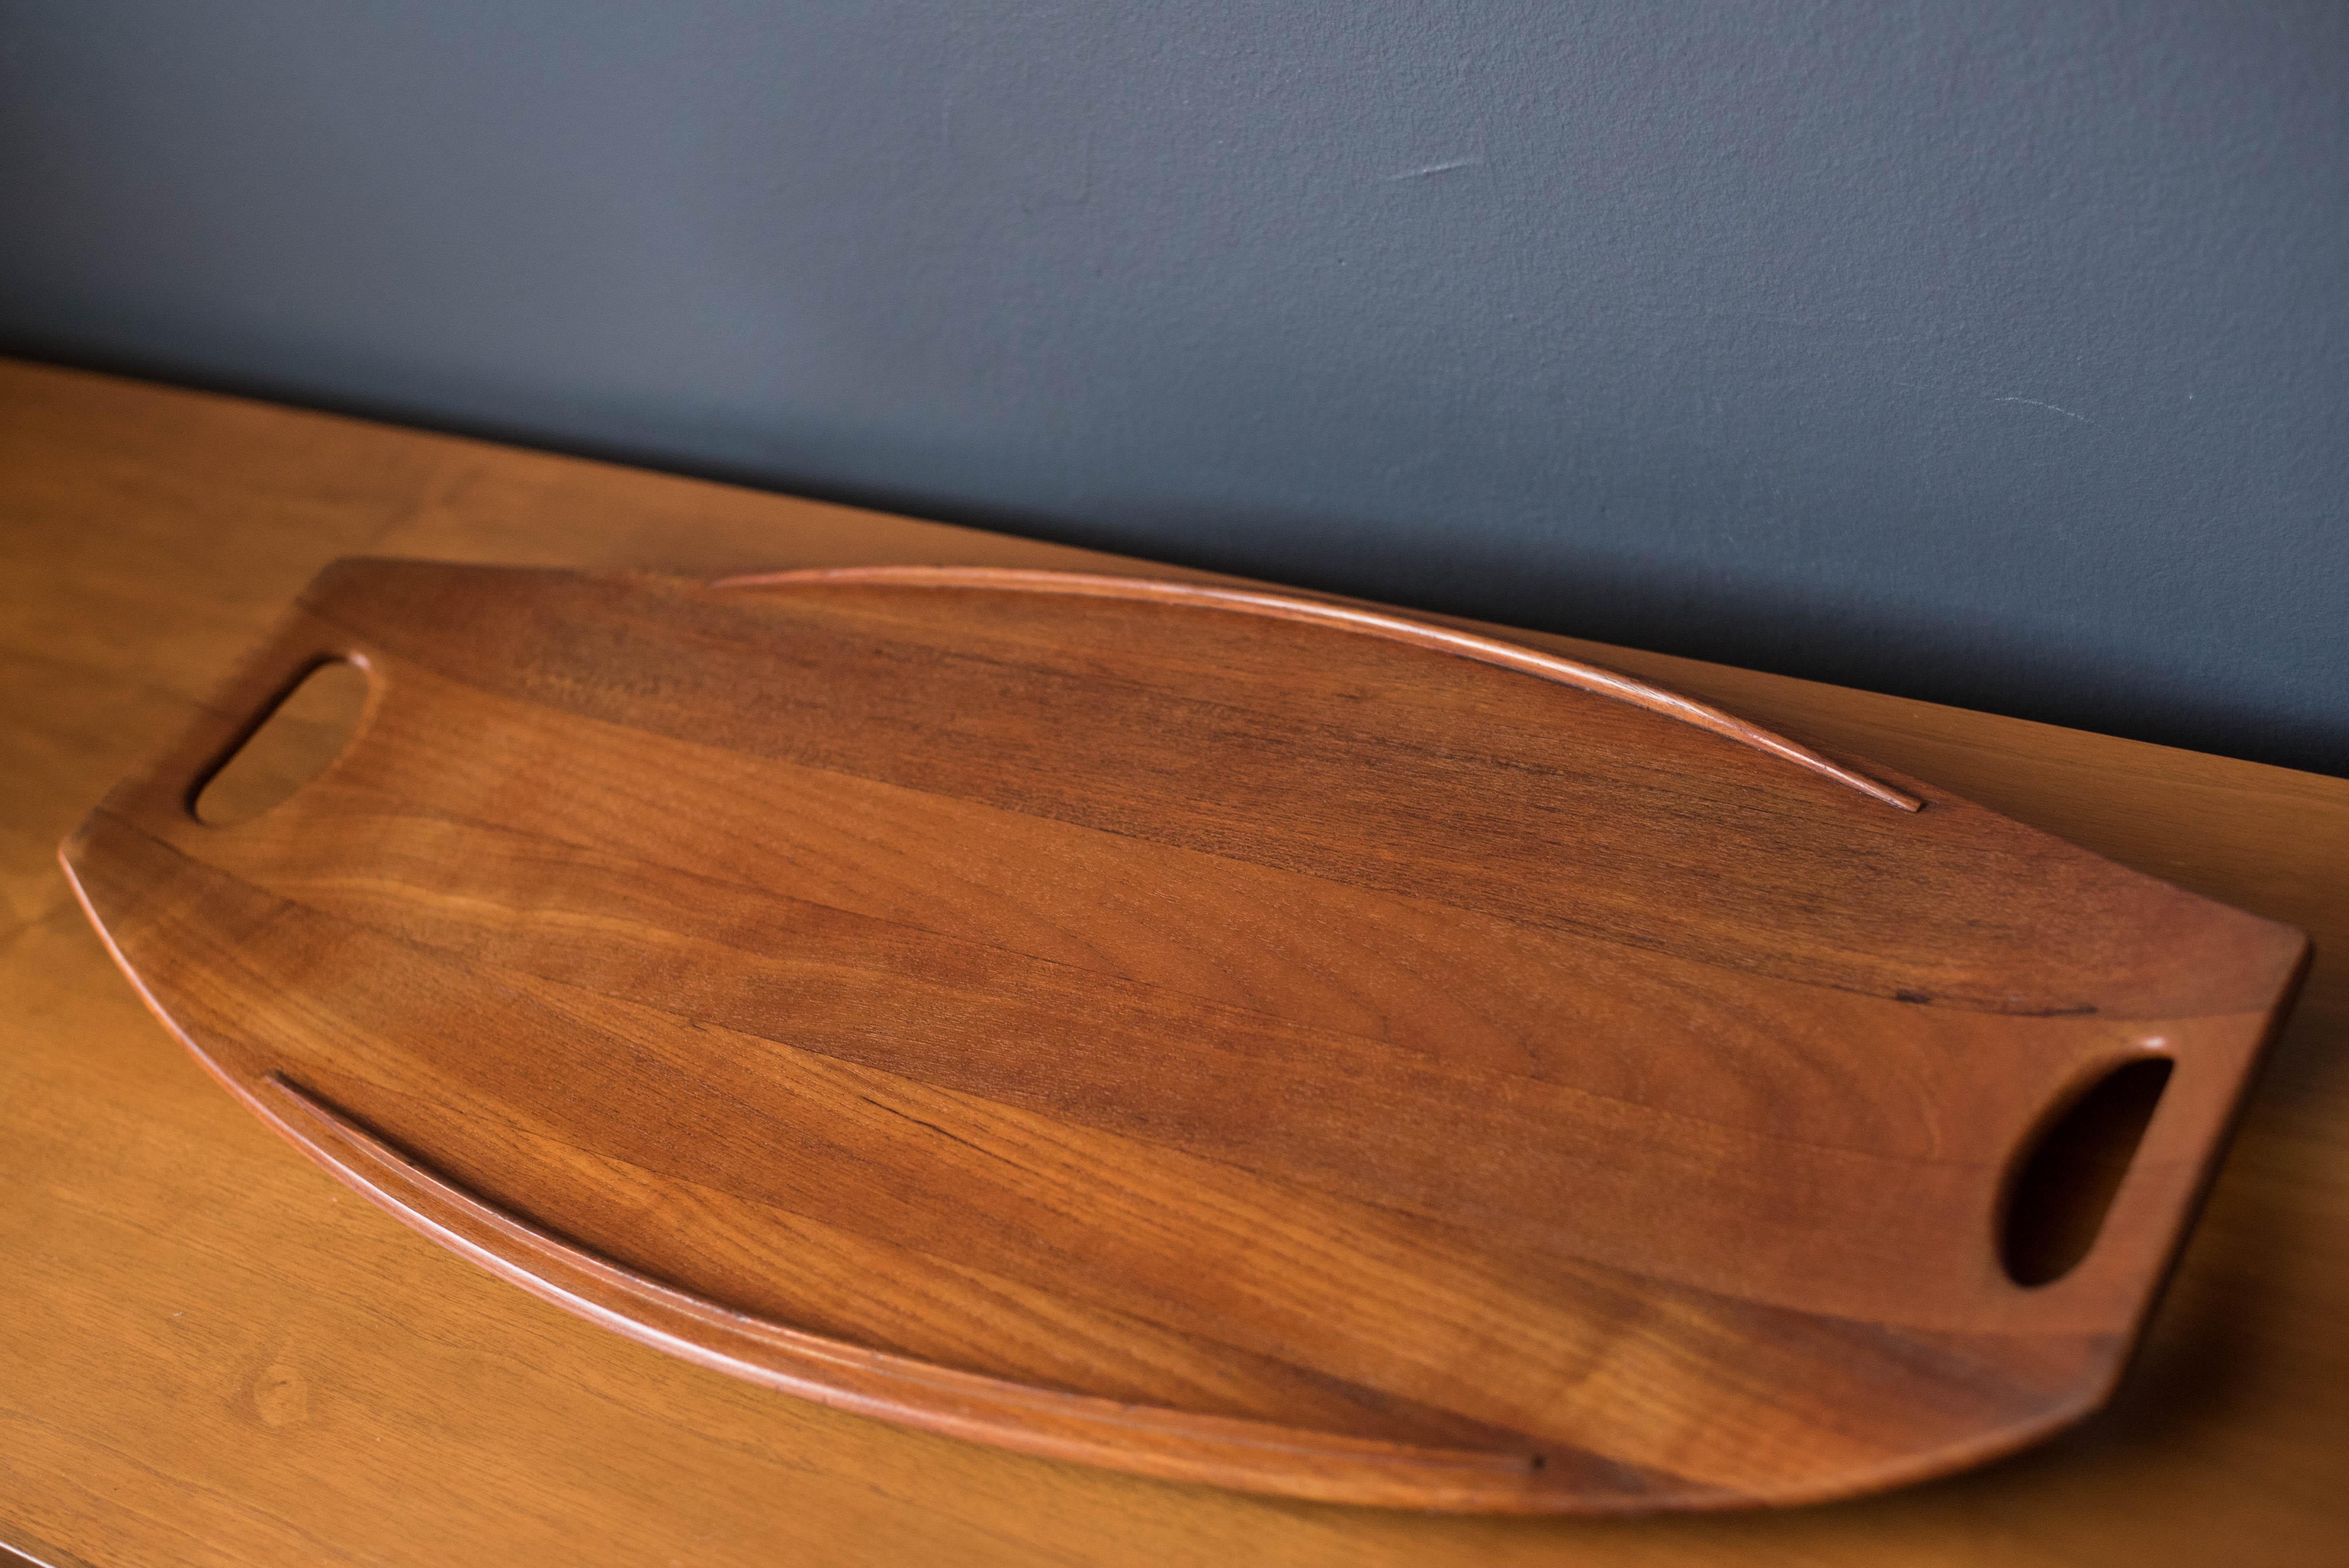 Vintage staved decorative tray #803 designed by Jens Quistgaard for Dansk. This early designed piece is the larger version and is made of solid planked teak.